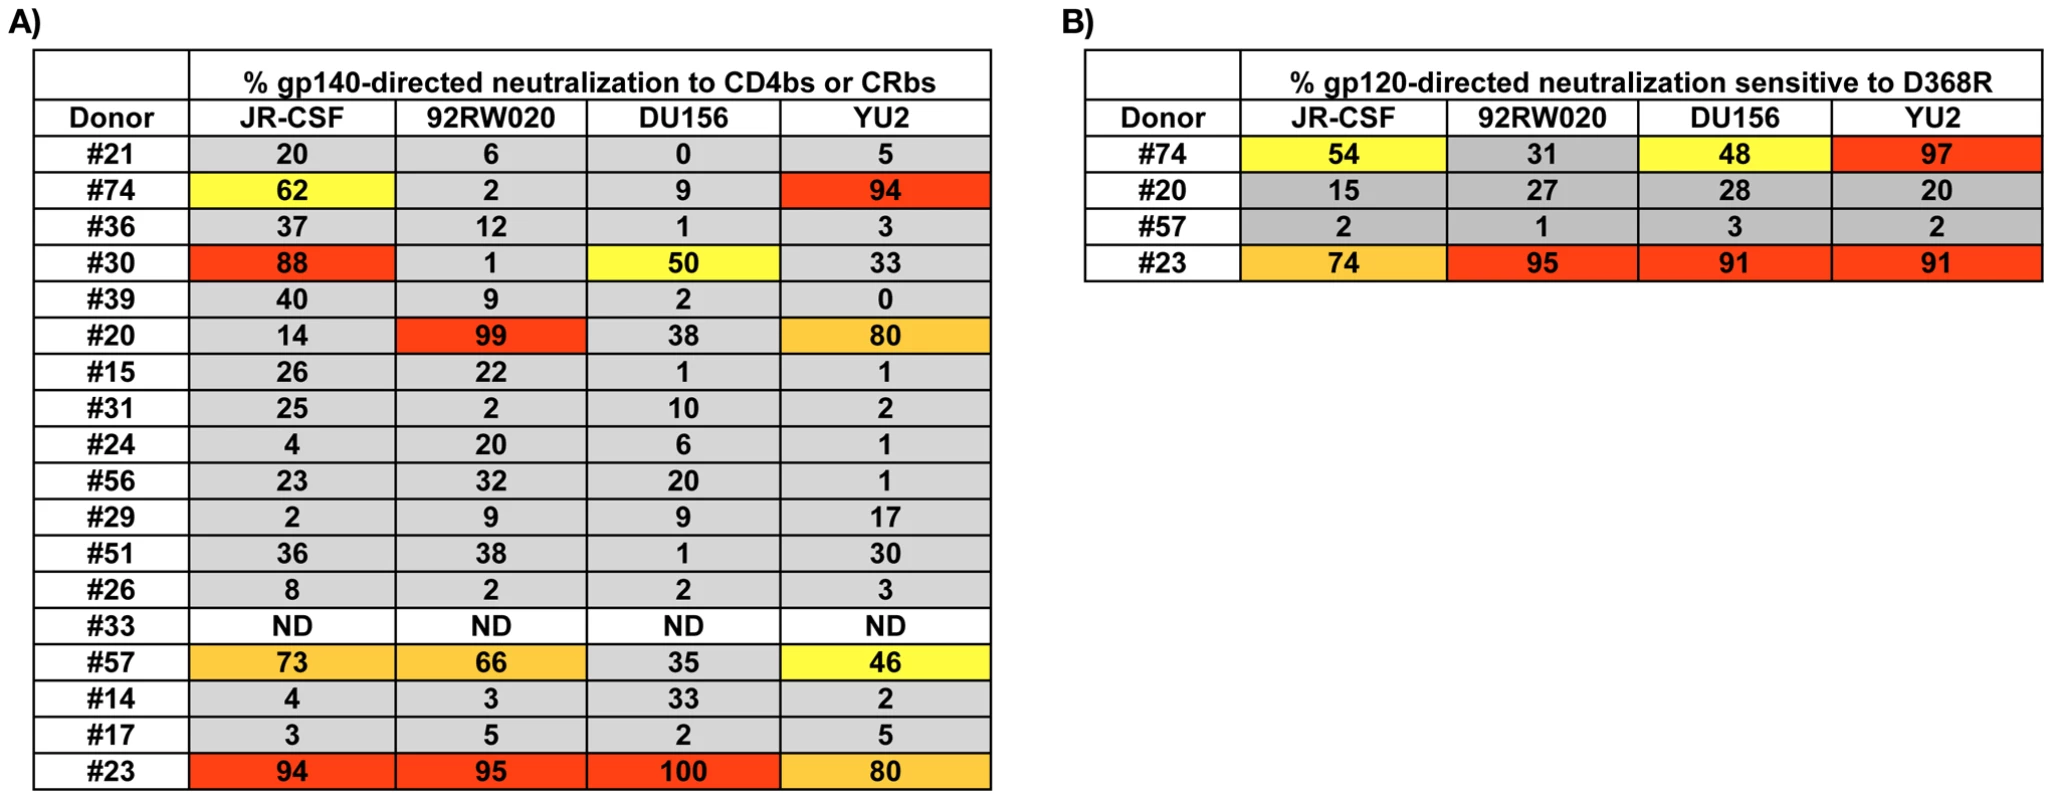 Analysis of CD4bs and CRbs-directed neutralizing activity.